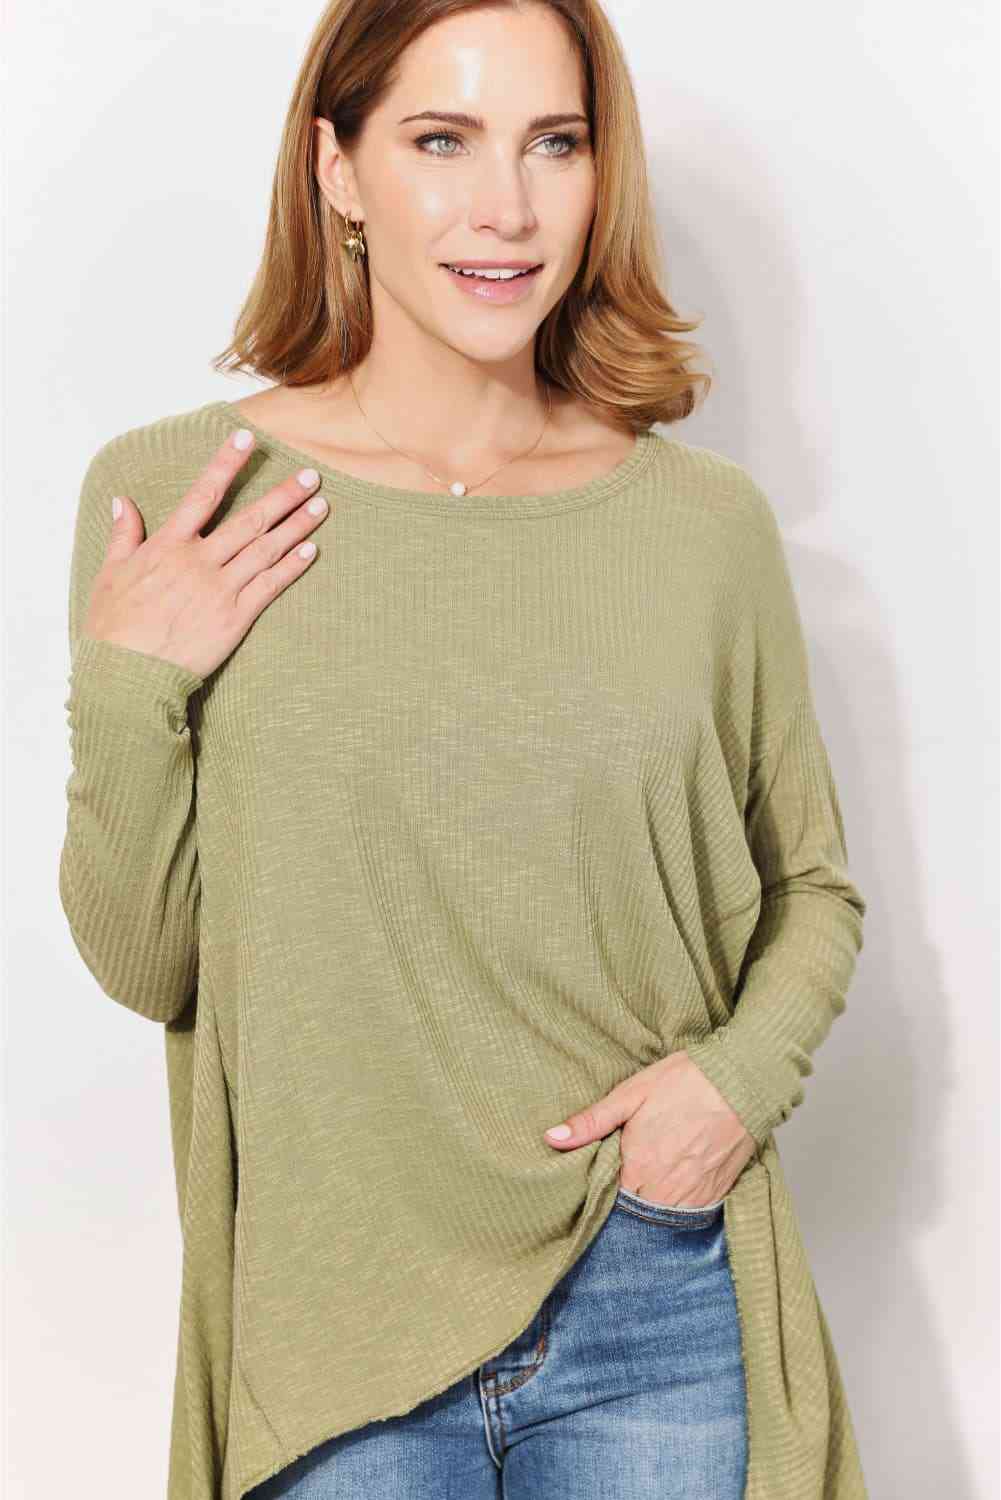 Tan HEYSON Full Size Oversized Super Soft Rib Layering Top with a Sharkbite Hem and Round Neck Sentient Beauty Fashions Apparel &amp; Accessories